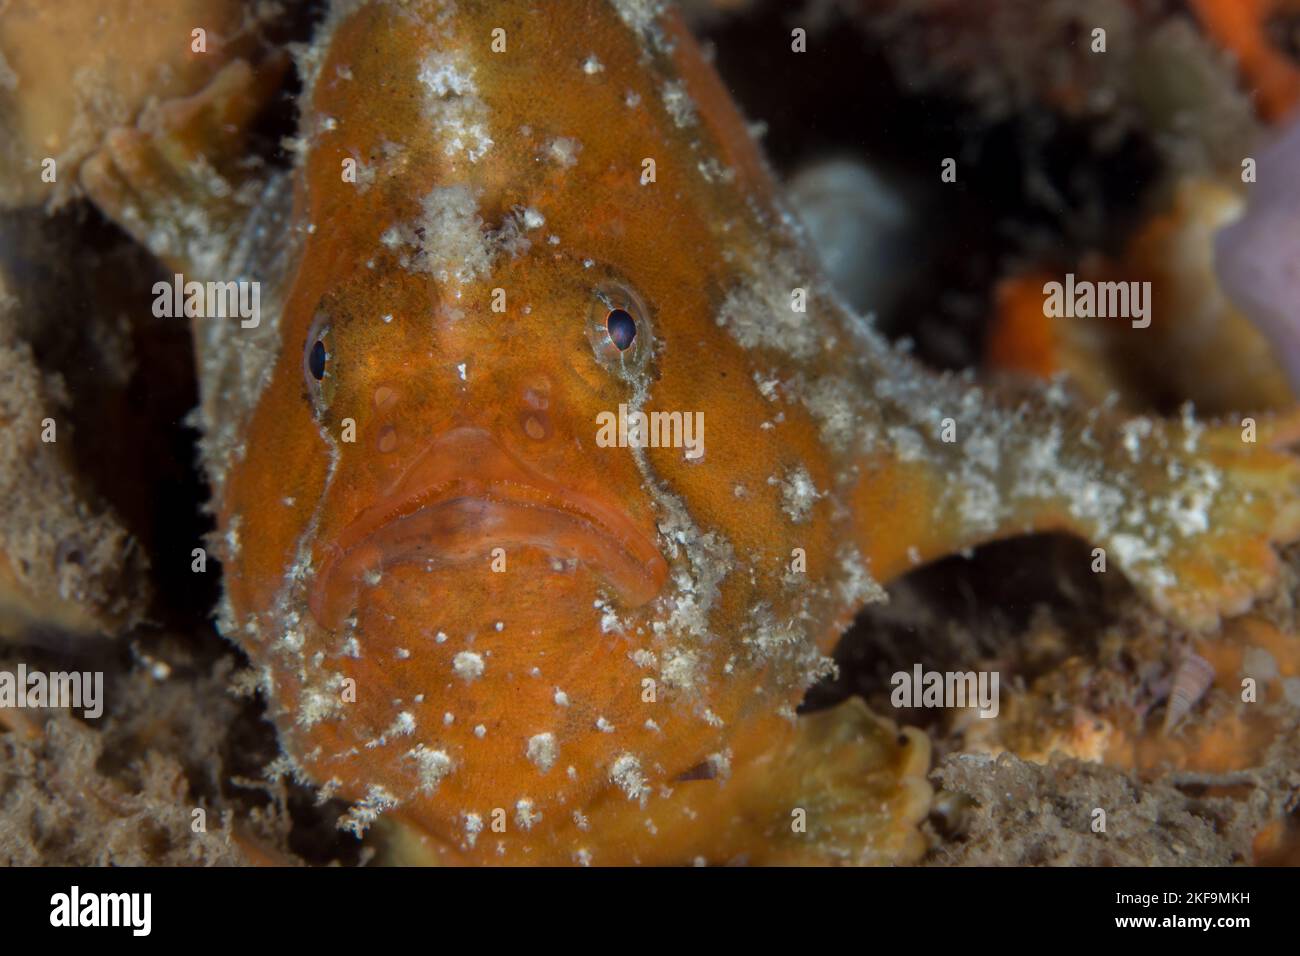 Close of detail of cryptic freckled frogfish - Antennatus coccineus Stock Photo